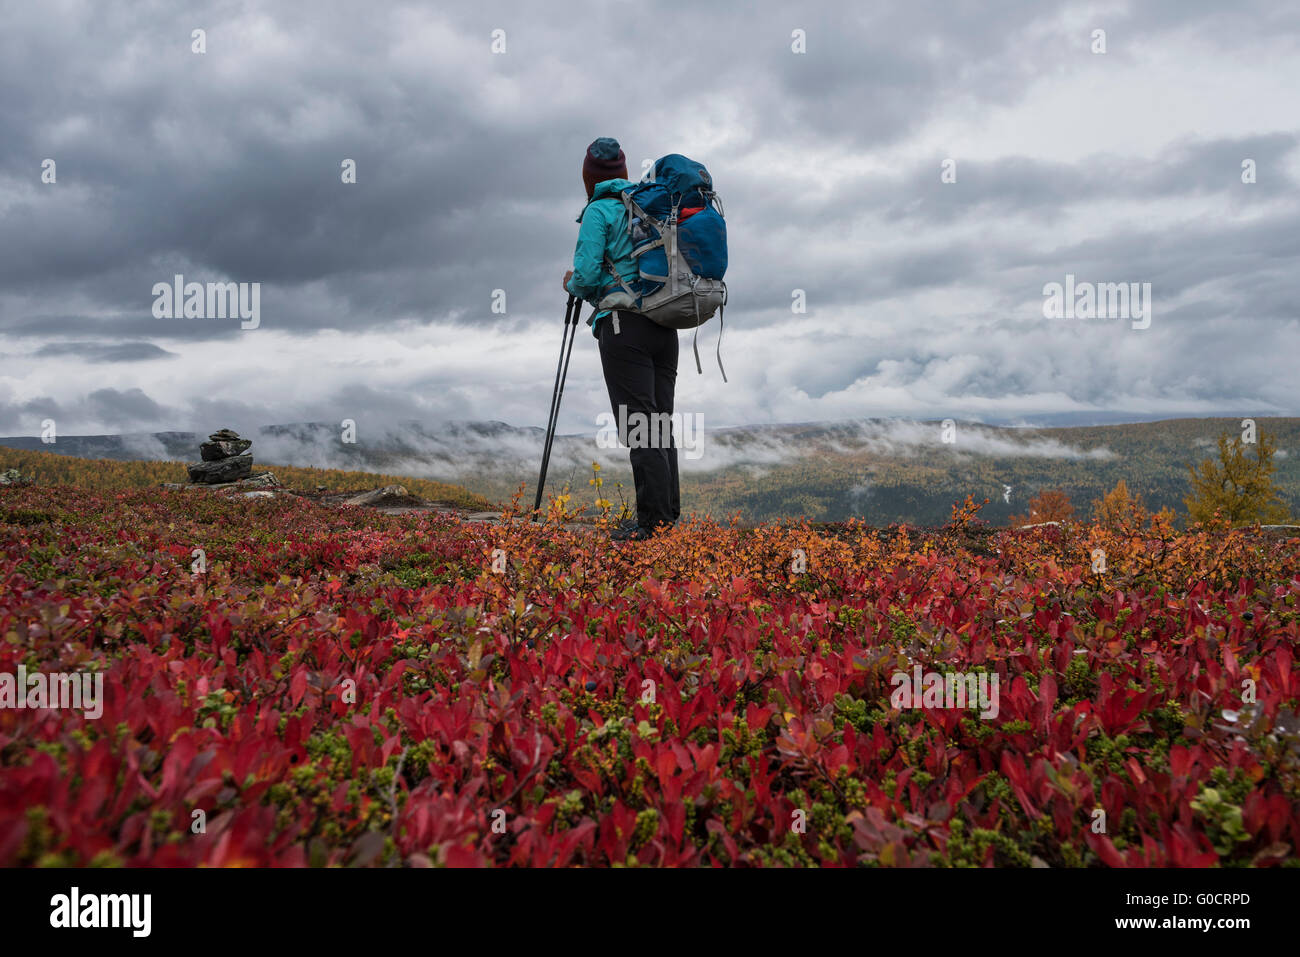 Female hiker takes in mountain view in colorful autumn landscape, near Aigert hut, Kungsleden trail, Lapland, Sweden Stock Photo